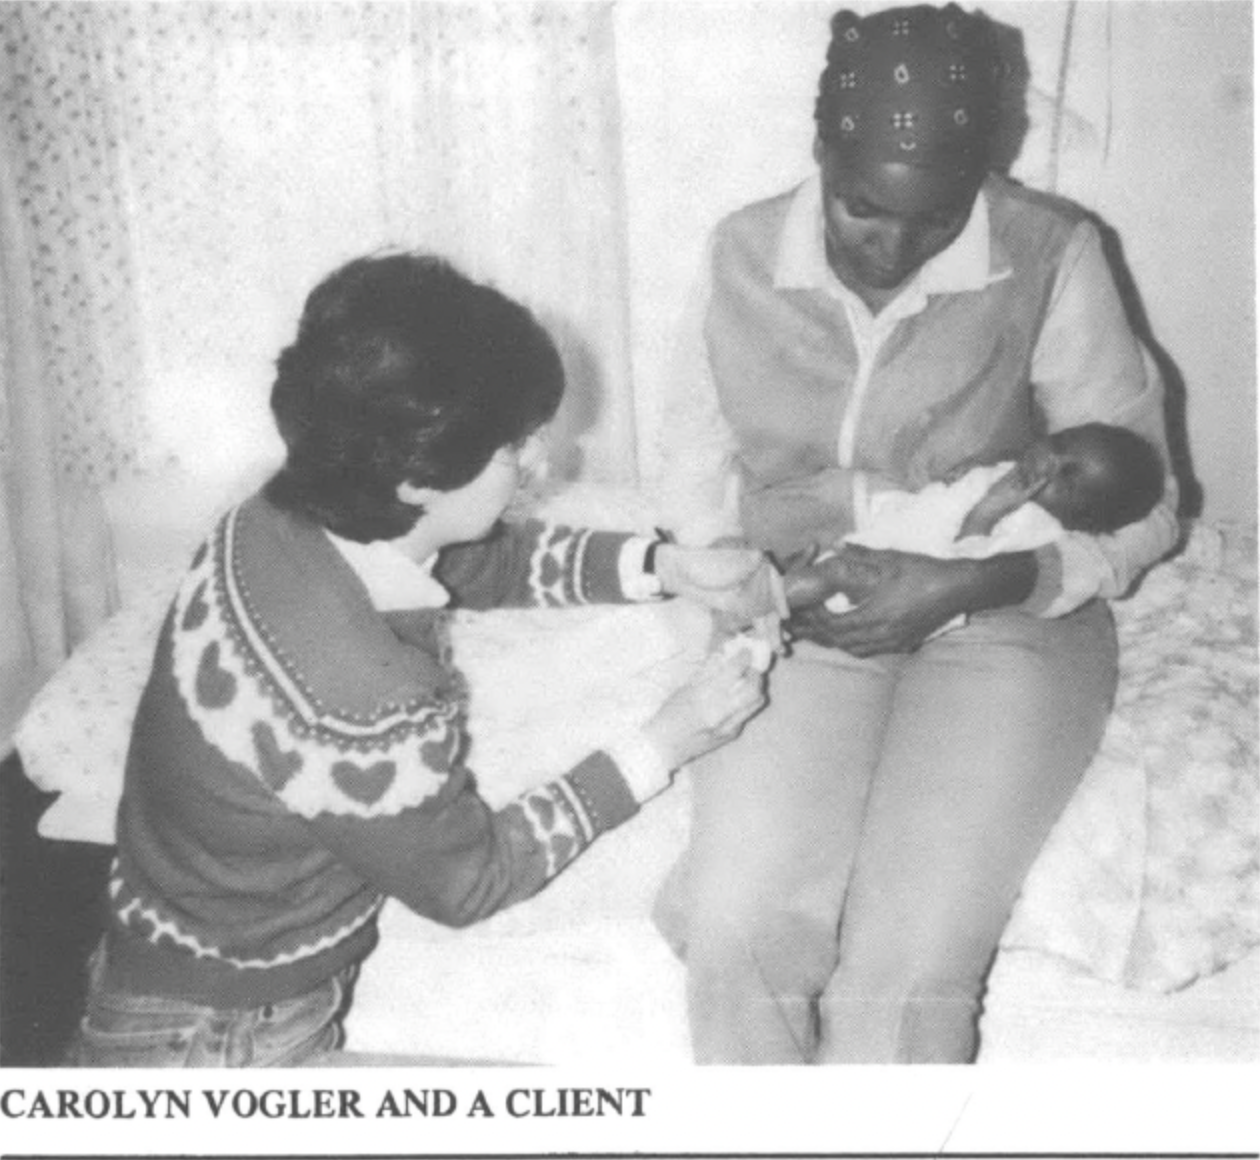 Carolyn Vogler and a client